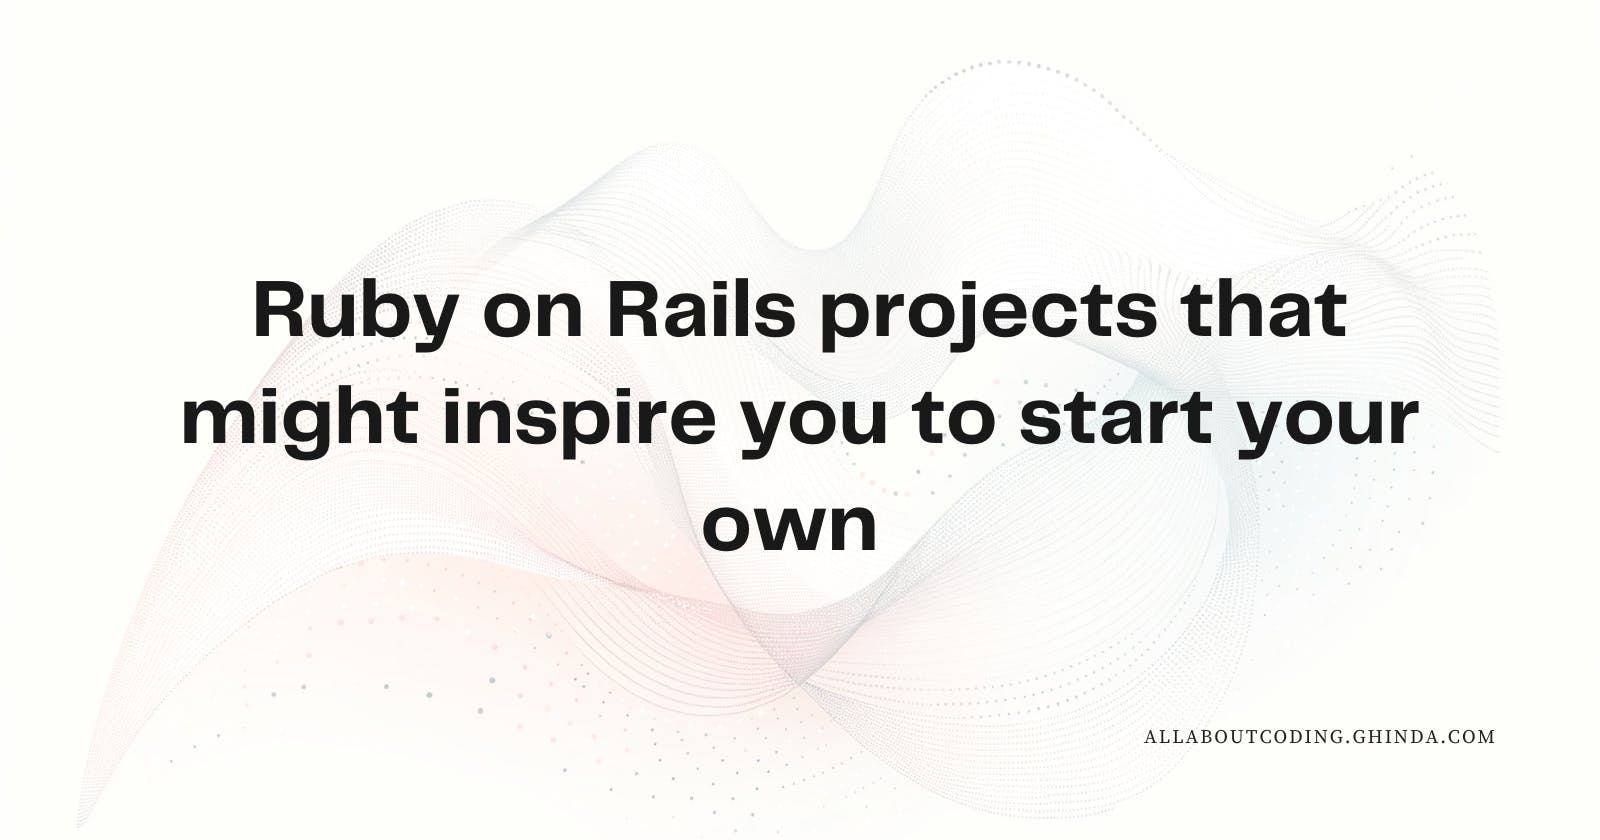 Ruby on Rails projects that might inspire you to start your own